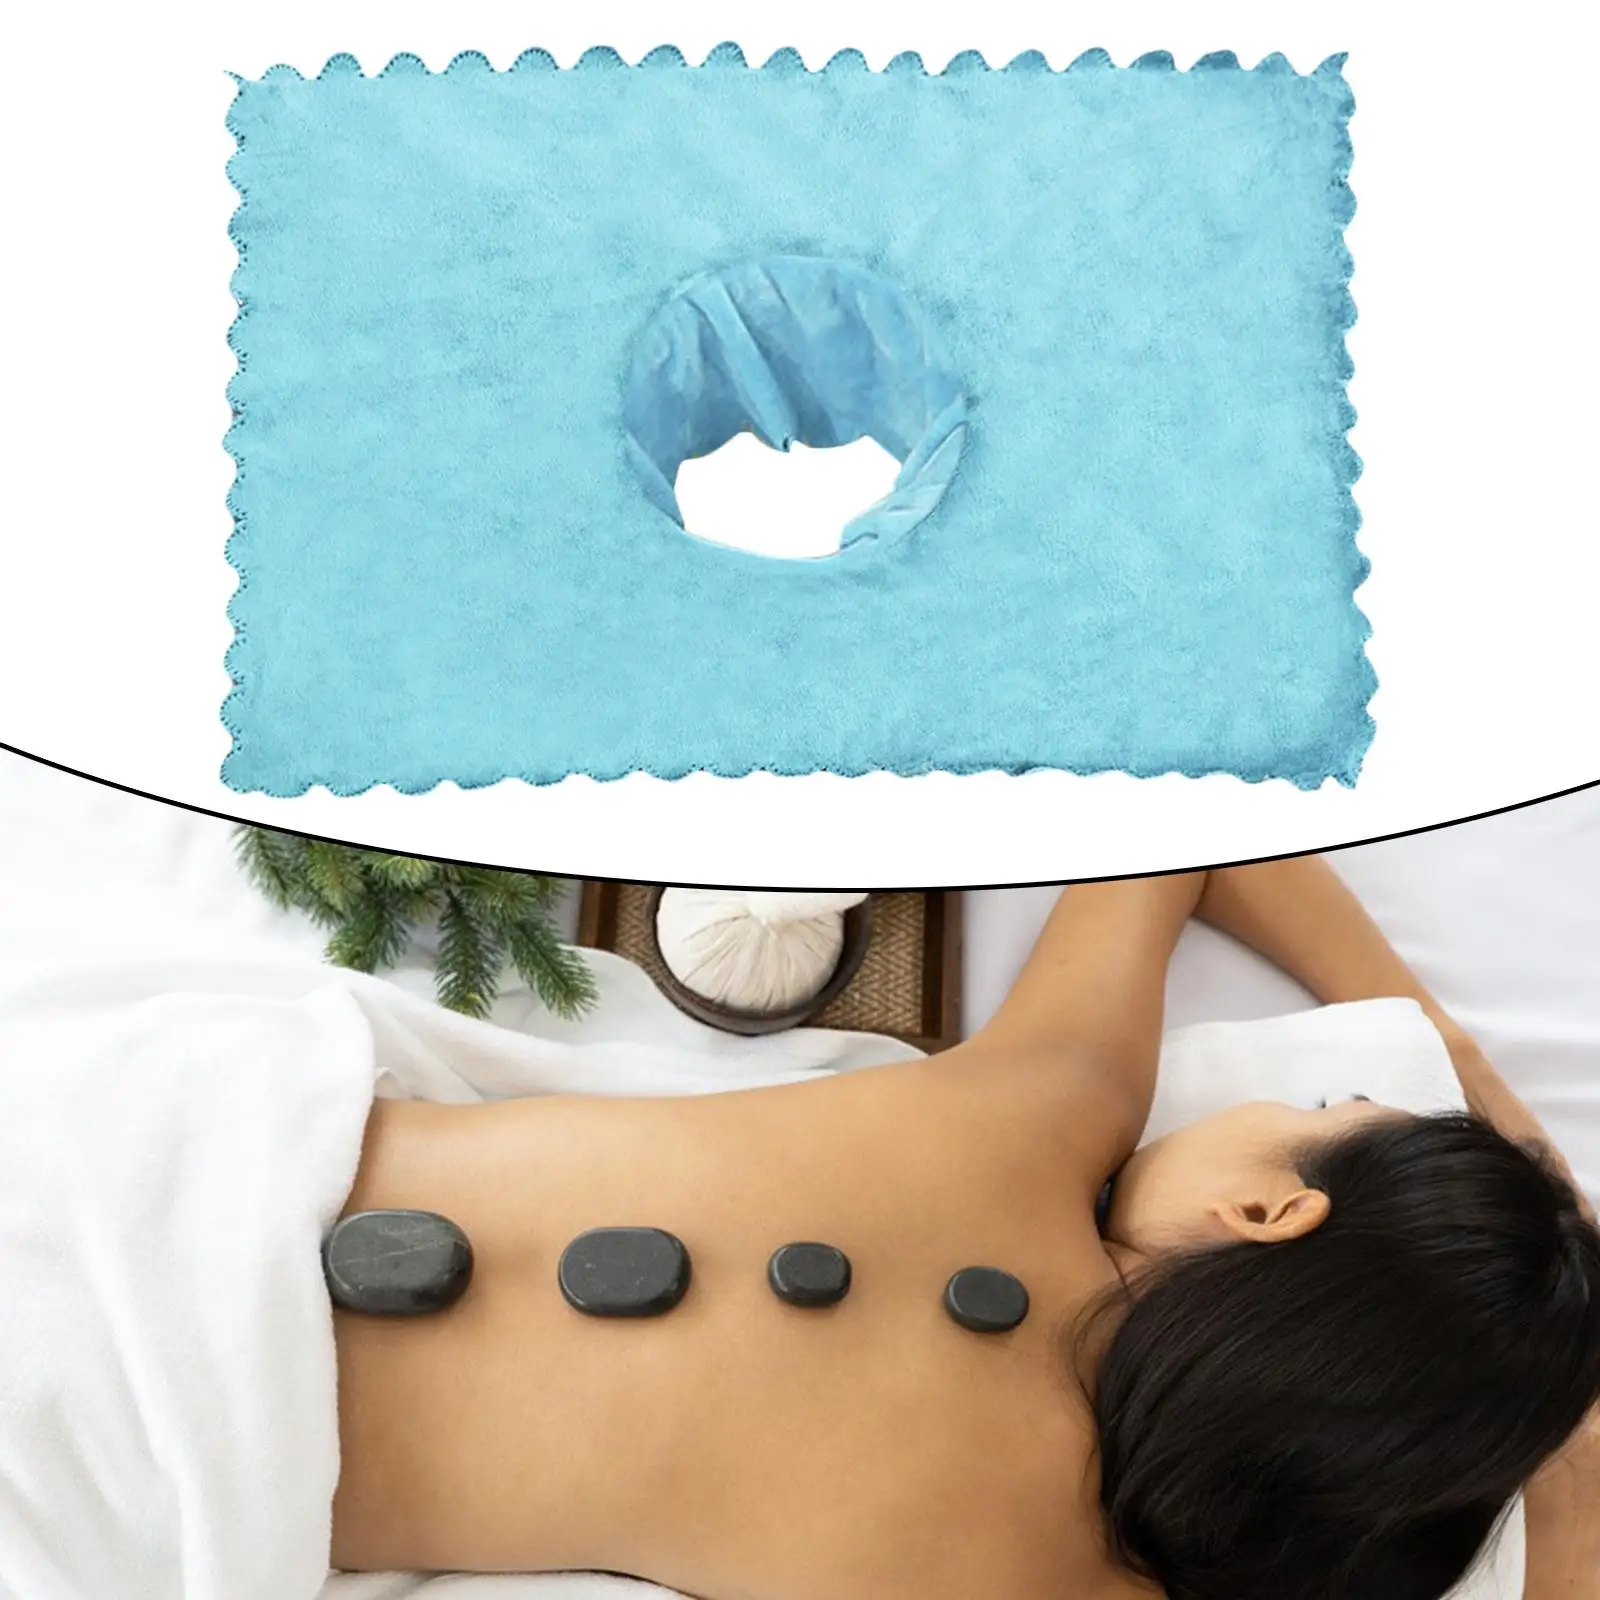 Massage Table Sheet Covers with Face Breath Hole Satin Strip Protector for Massage Bed